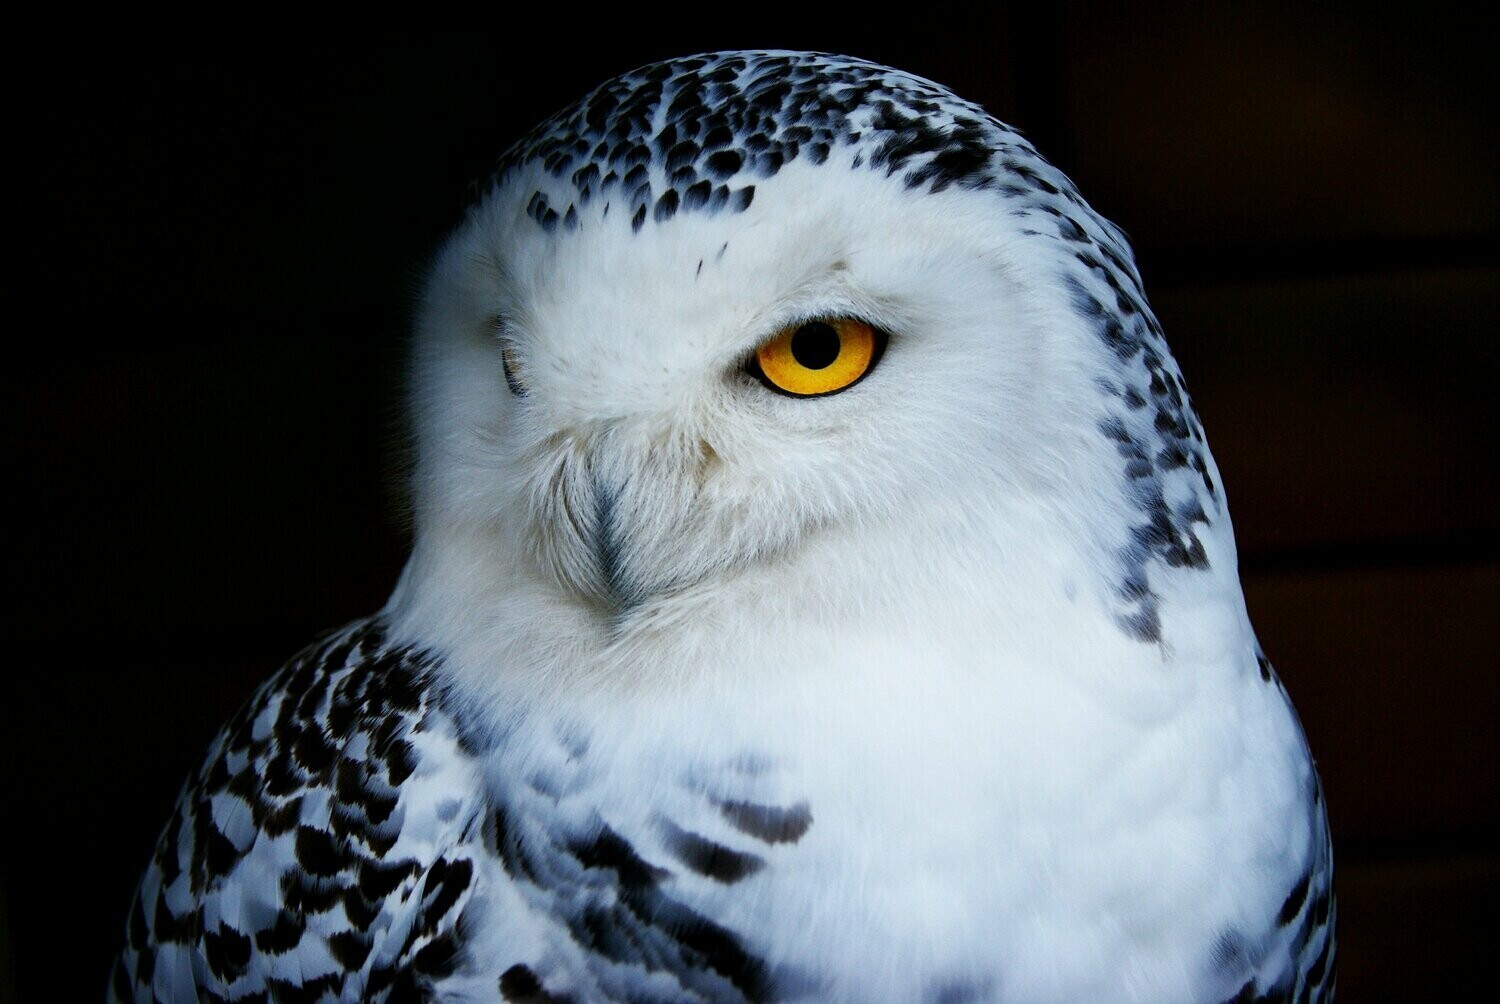 White Snowy Owl - Specially ordered for you. Delivery is approximately 4 - 6 weeks.